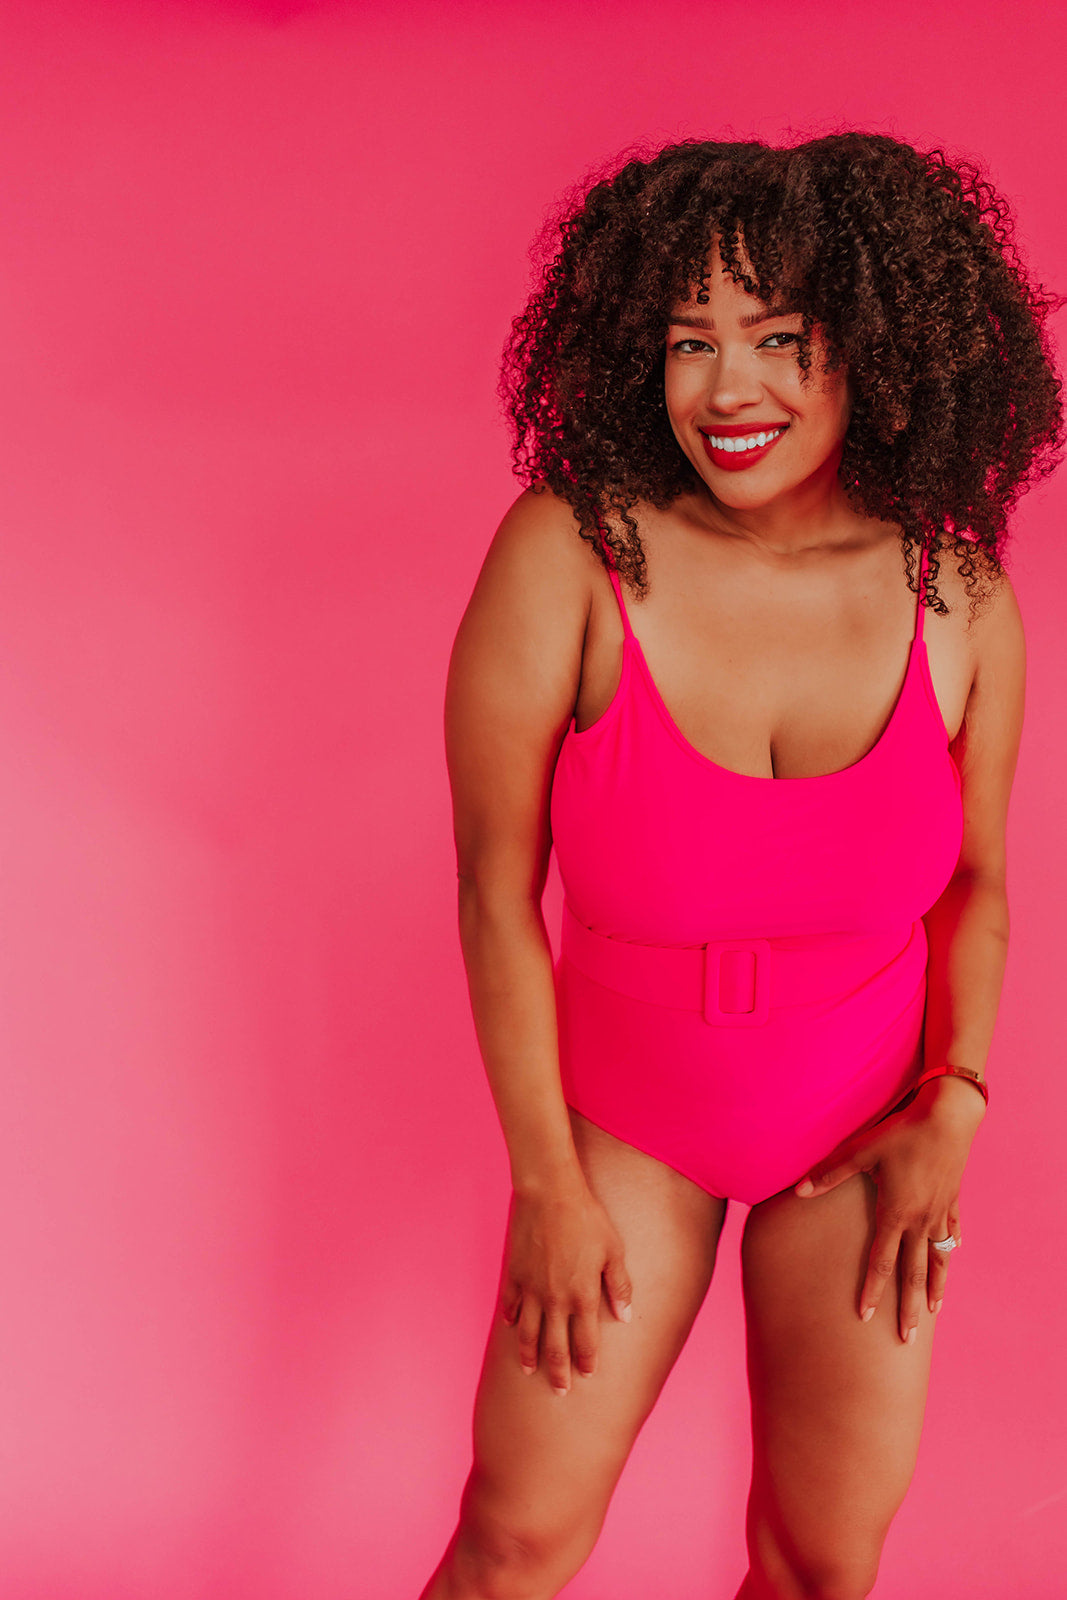 MONROE BELTED ONE PIECE IN NEON PINK BY BETSY MIKESELL X PINK DESERT